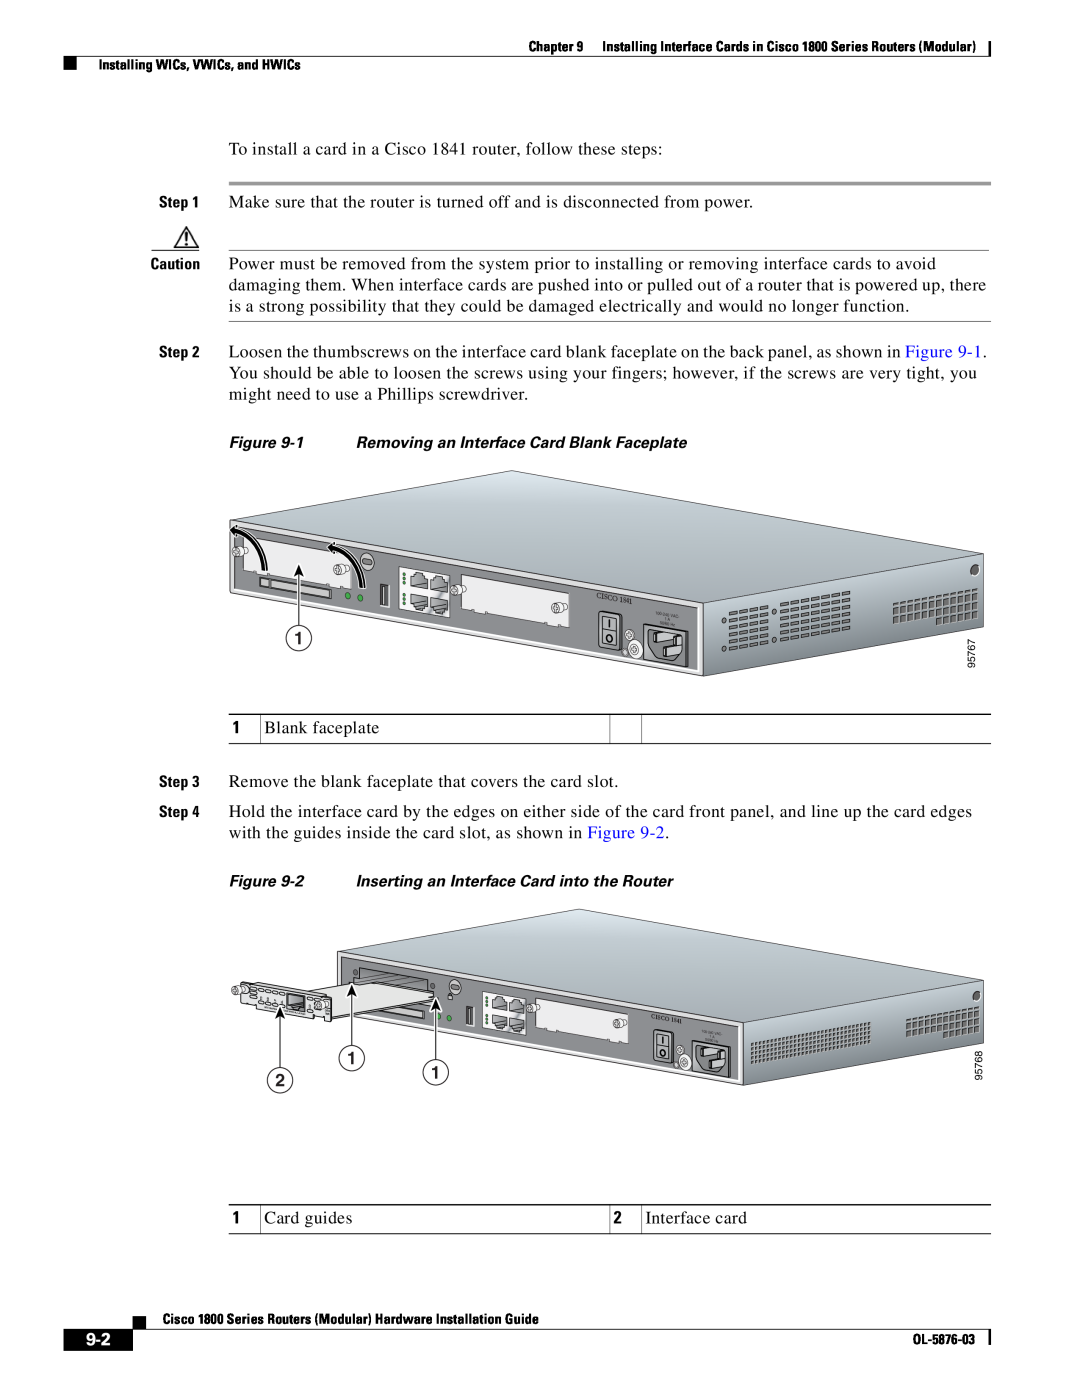 Cisco Systems CISCO1841-HSEC/K9-RF manual To install a card in a Cisco 1841 router, follow these steps 